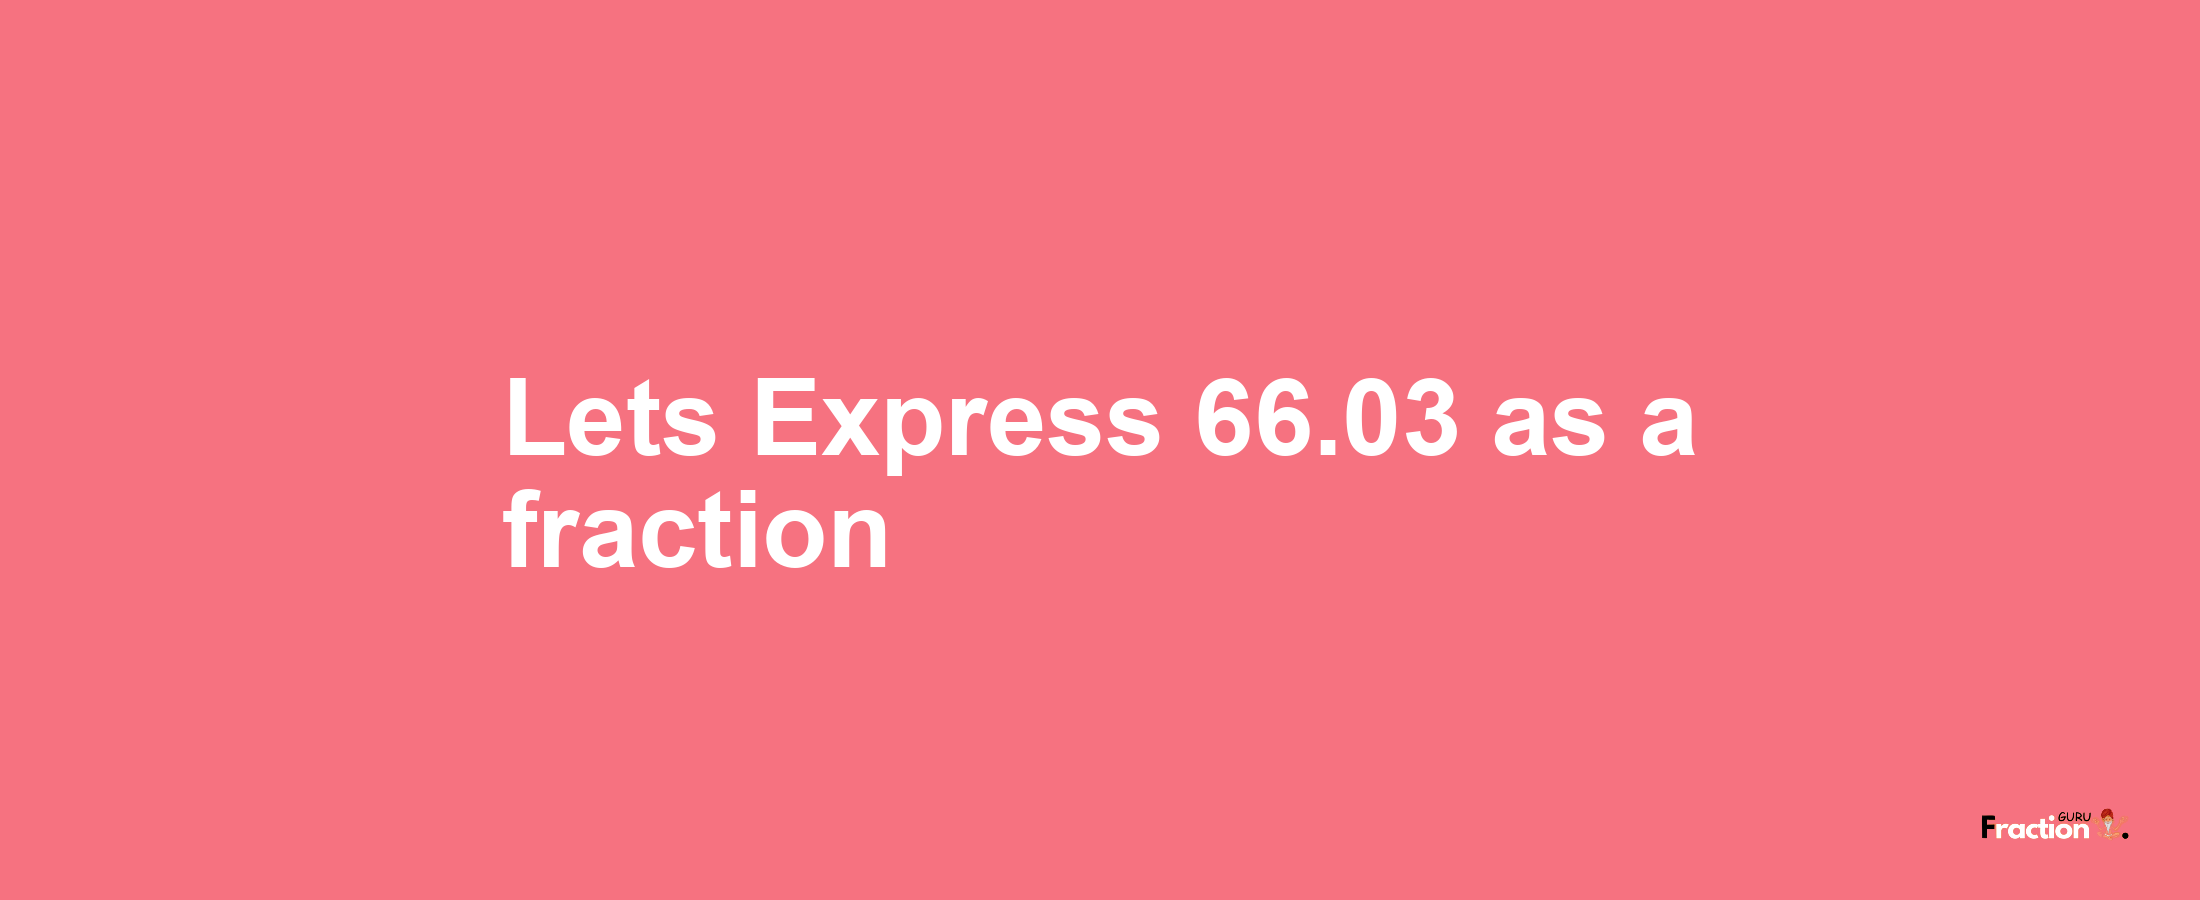 Lets Express 66.03 as afraction